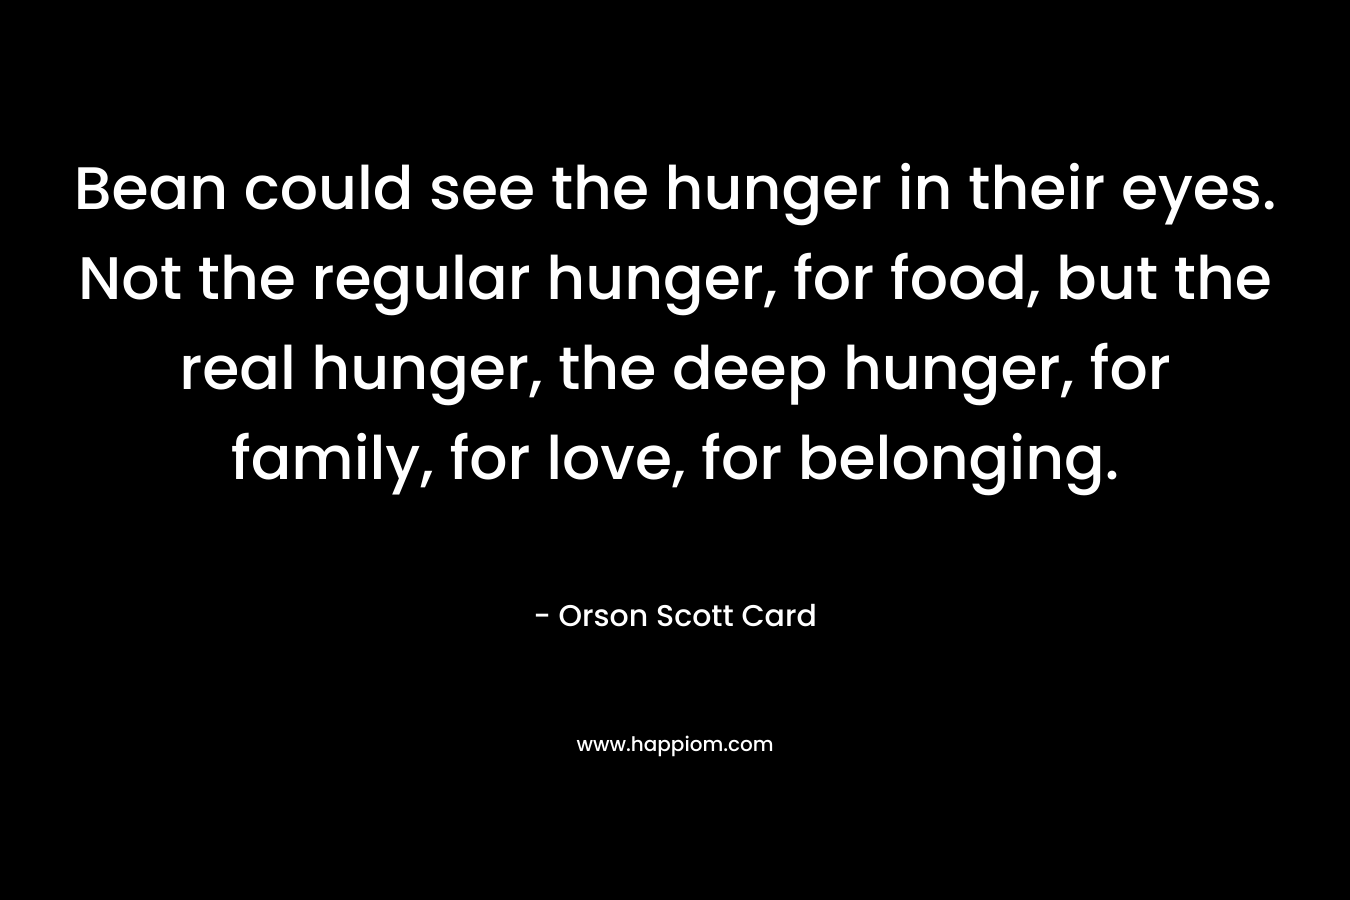 Bean could see the hunger in their eyes. Not the regular hunger, for food, but the real hunger, the deep hunger, for family, for love, for belonging. – Orson Scott Card